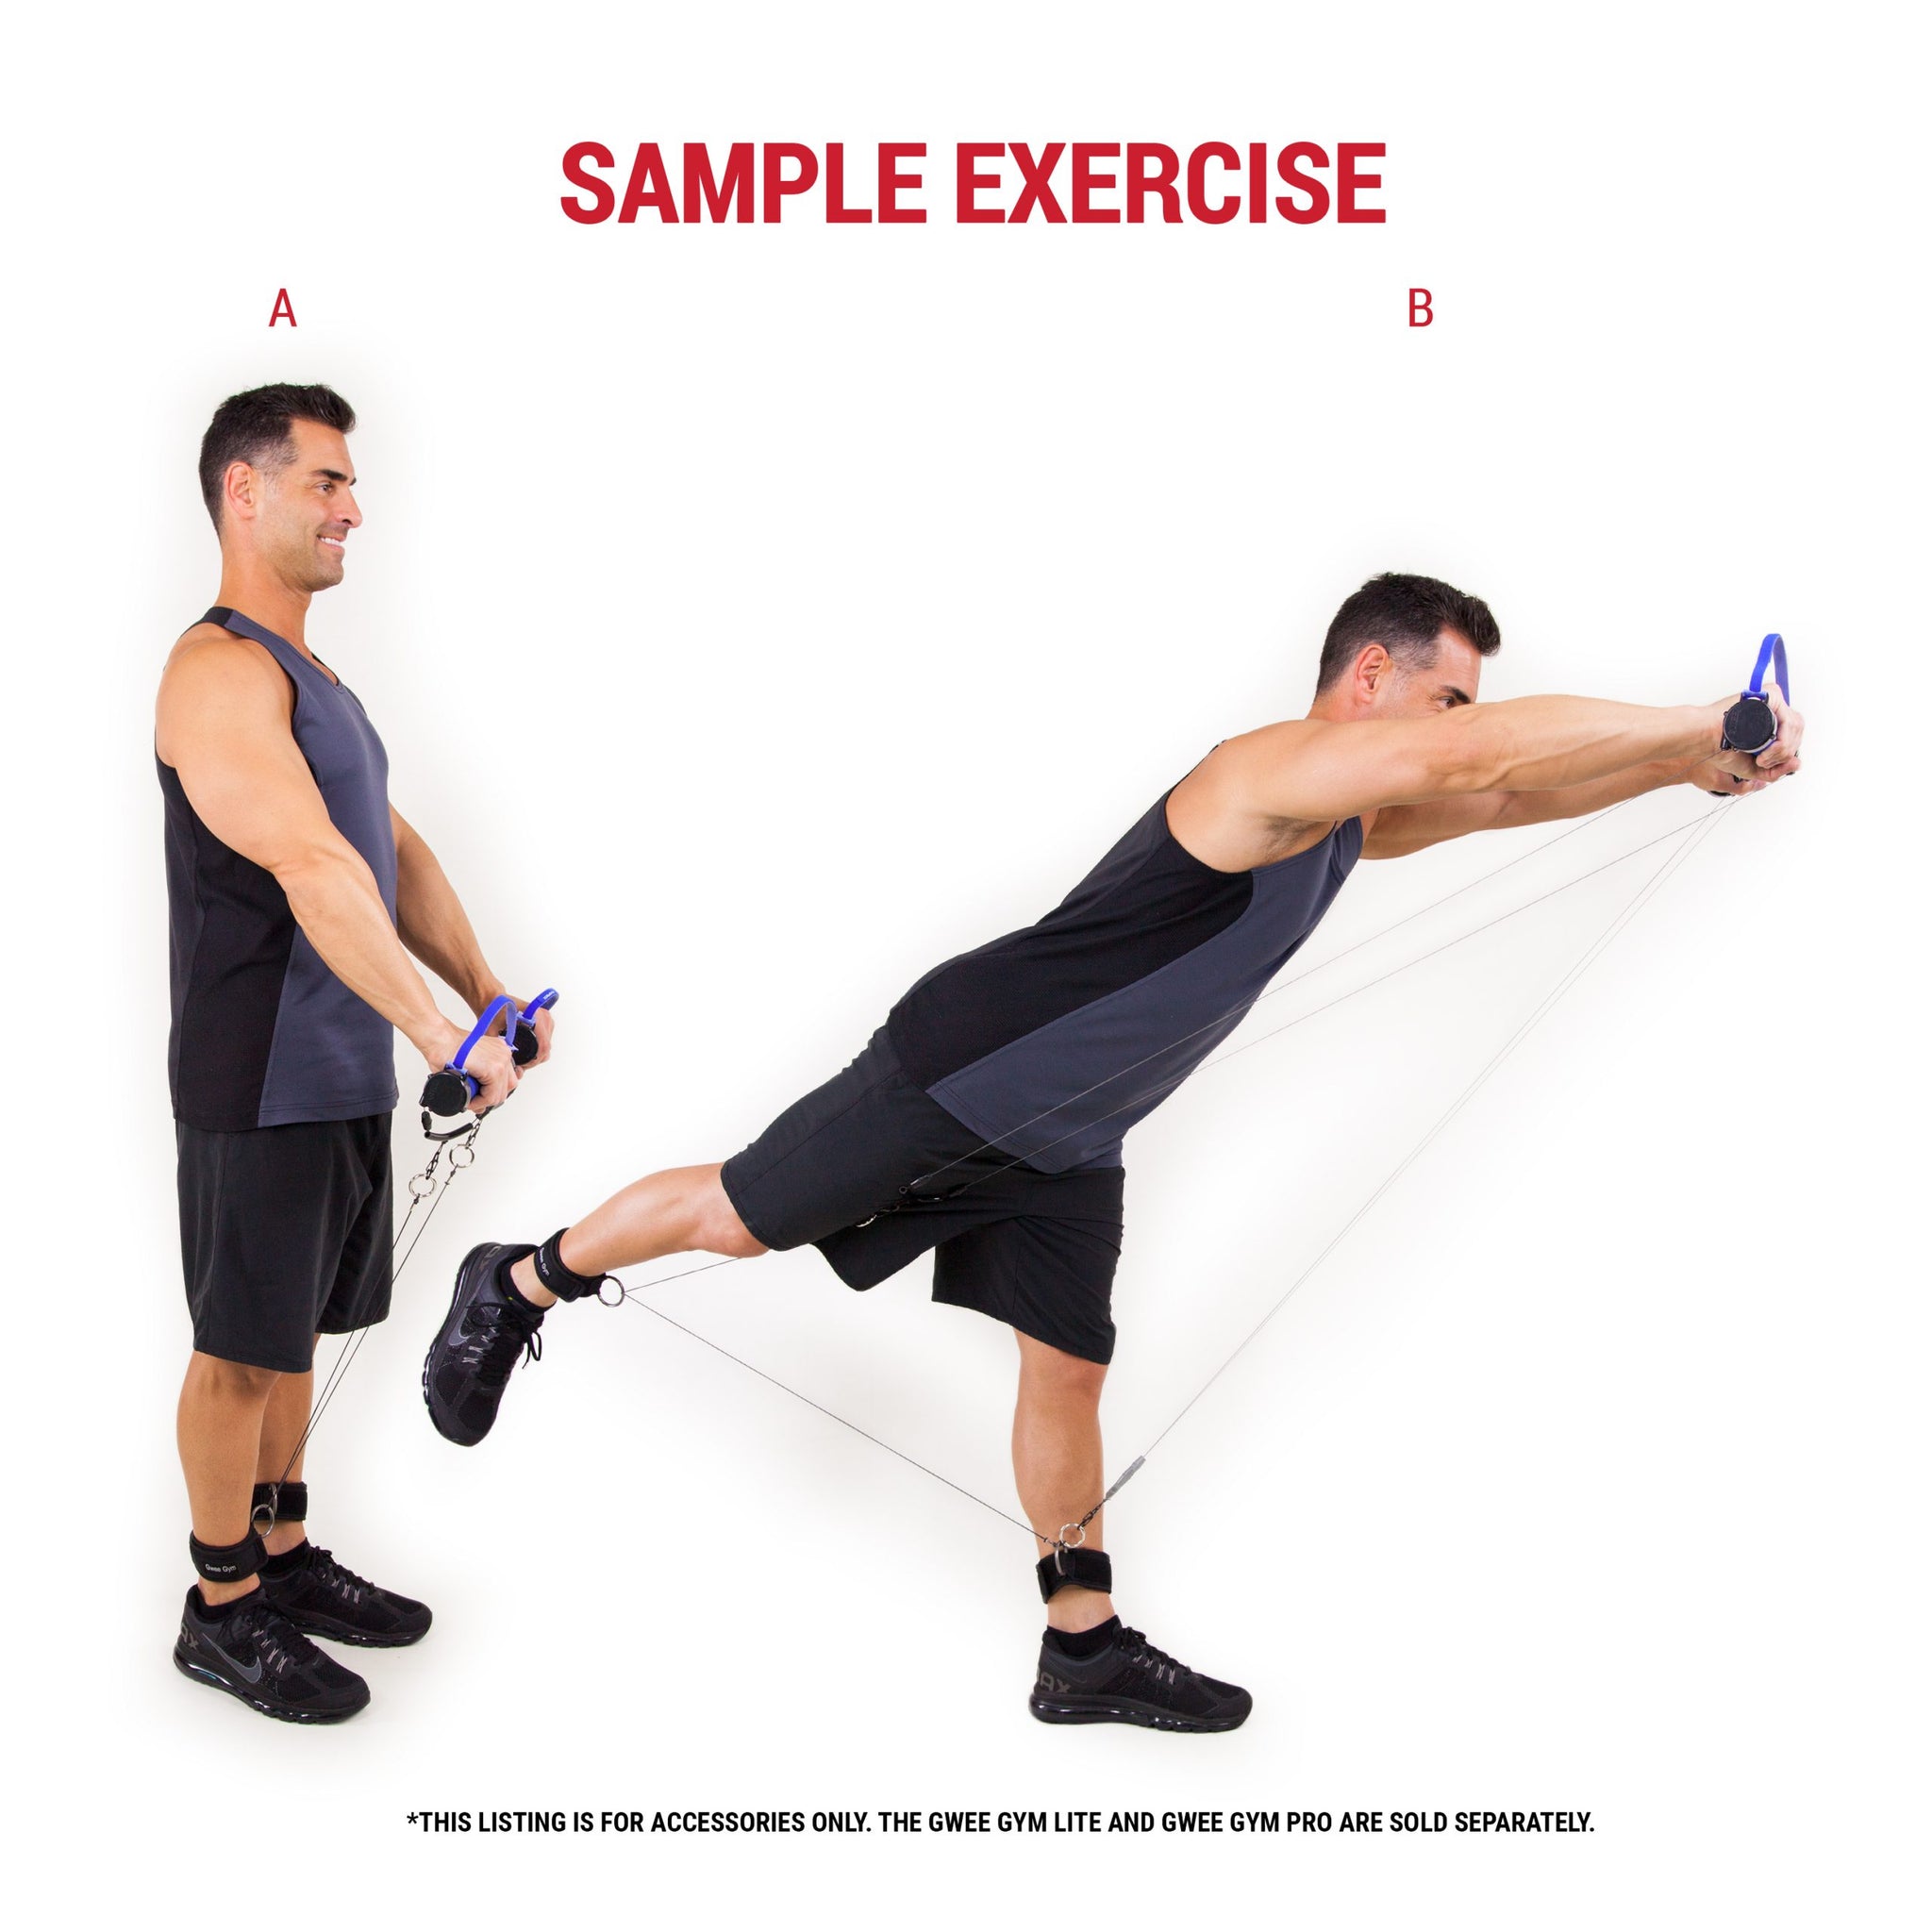 Sample fitness accessories